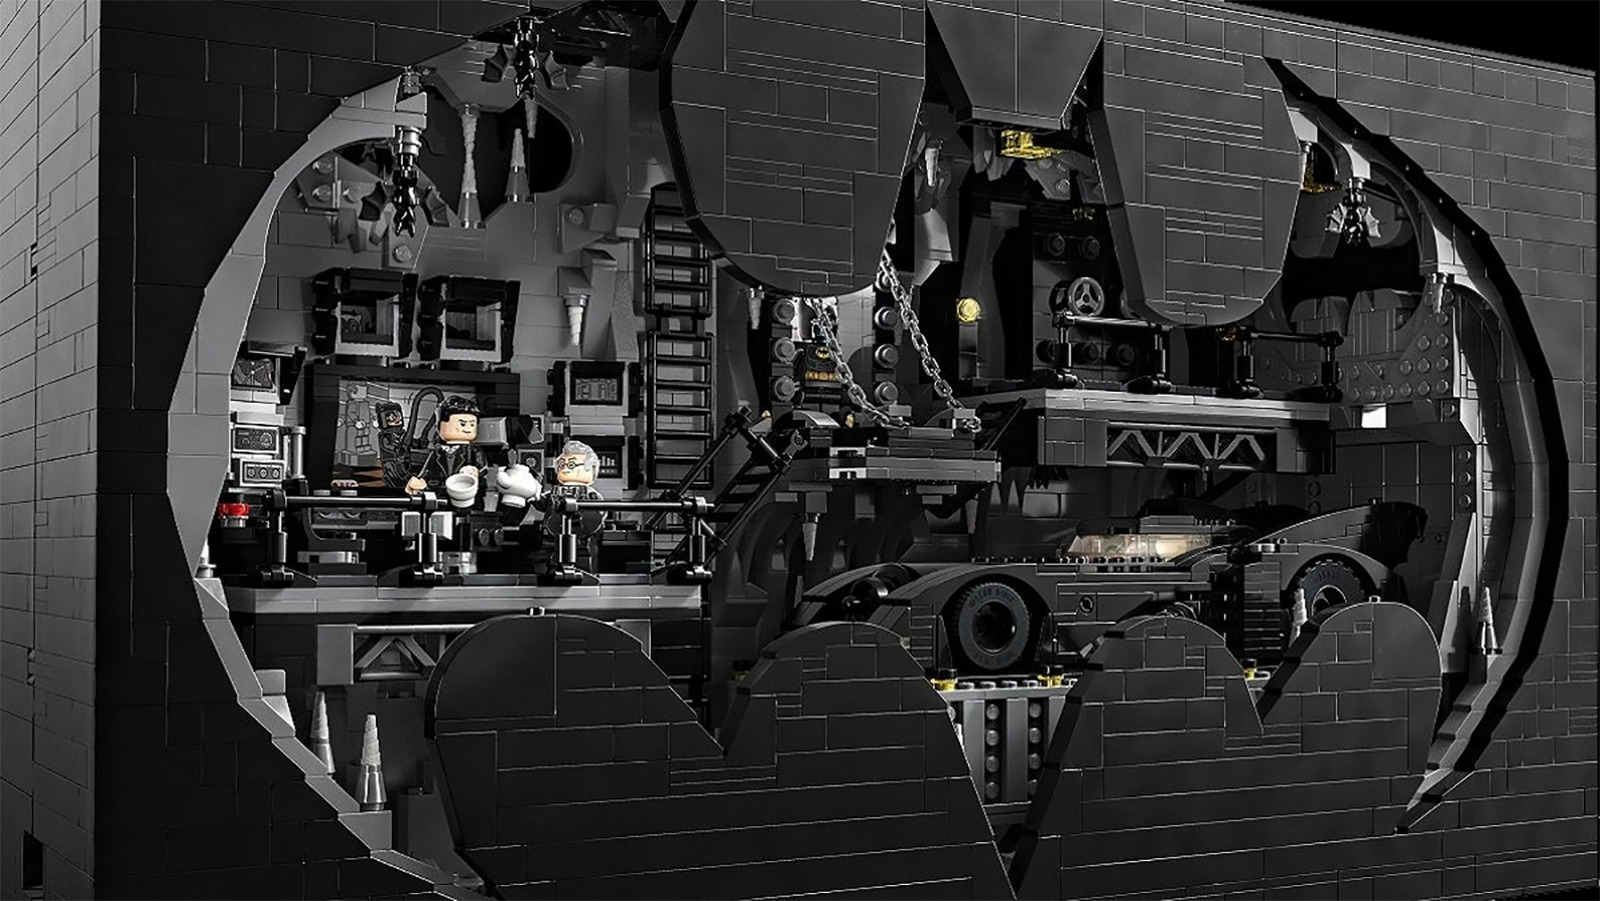 LEGO's Batman Returns Batcave Is A Punishingly Tedious Build, But It's  Worth The Time And Effort